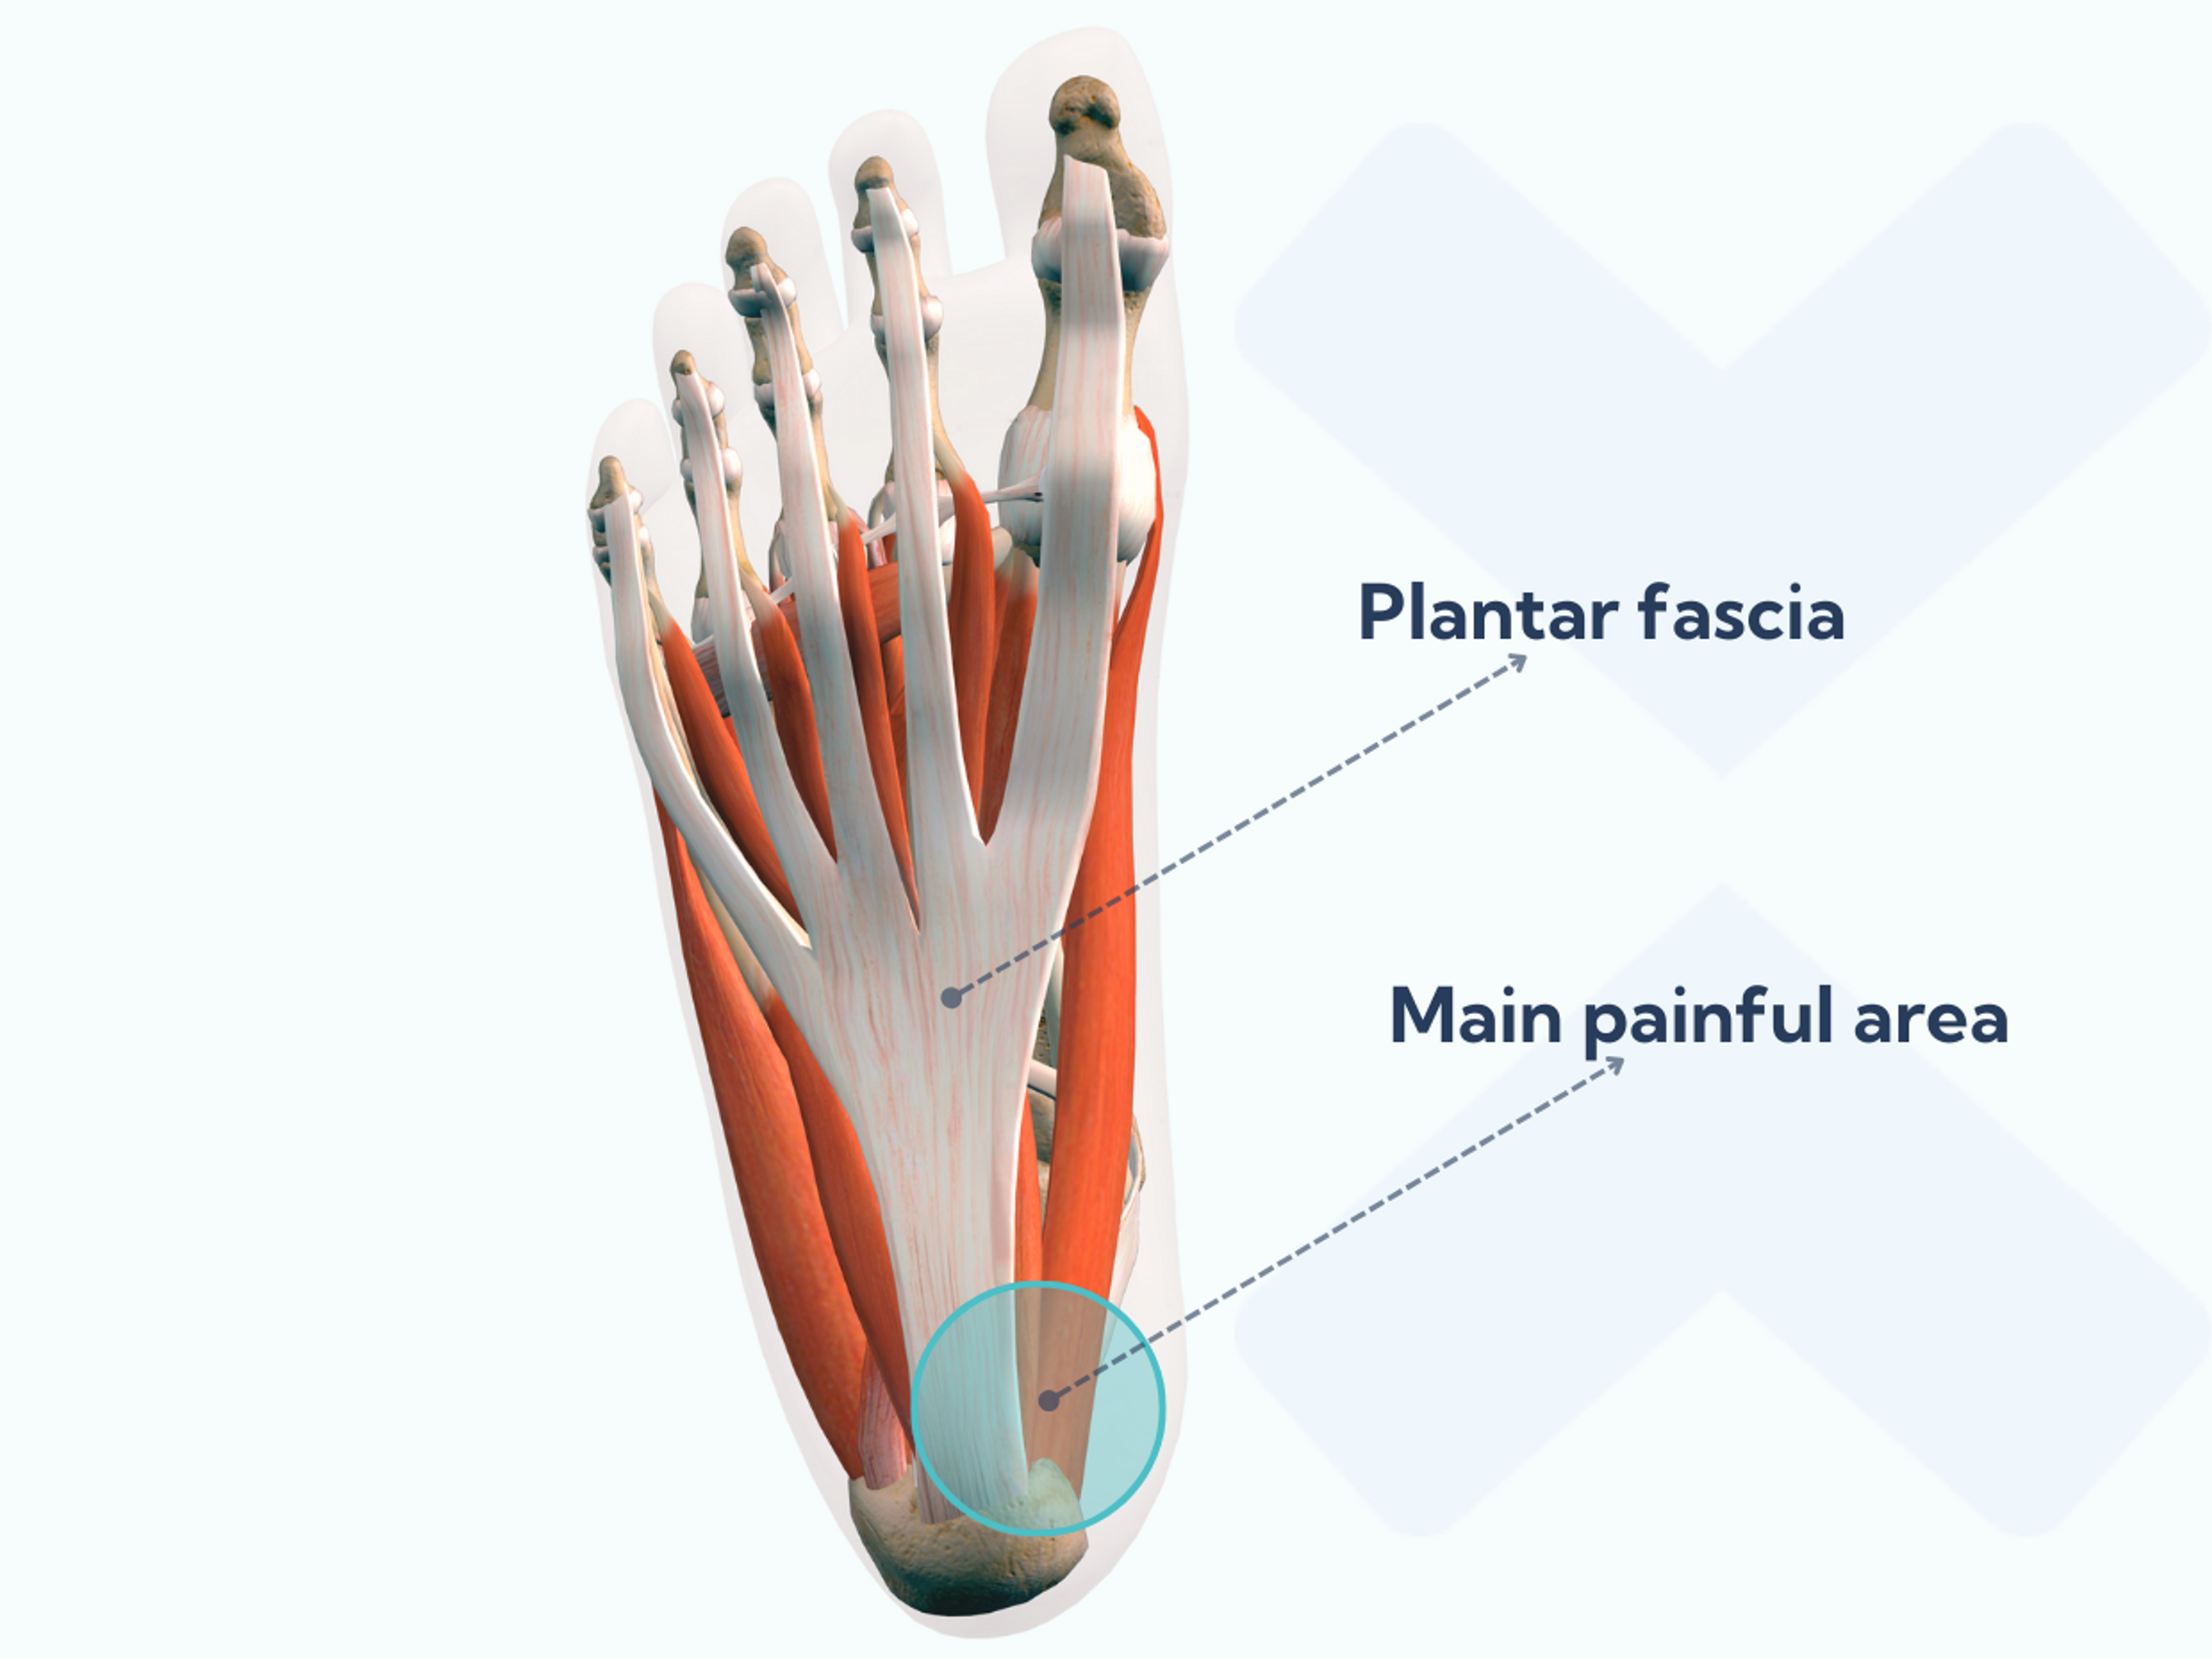 The plantar fascia runs under your foot, from your heel bone to your toes.